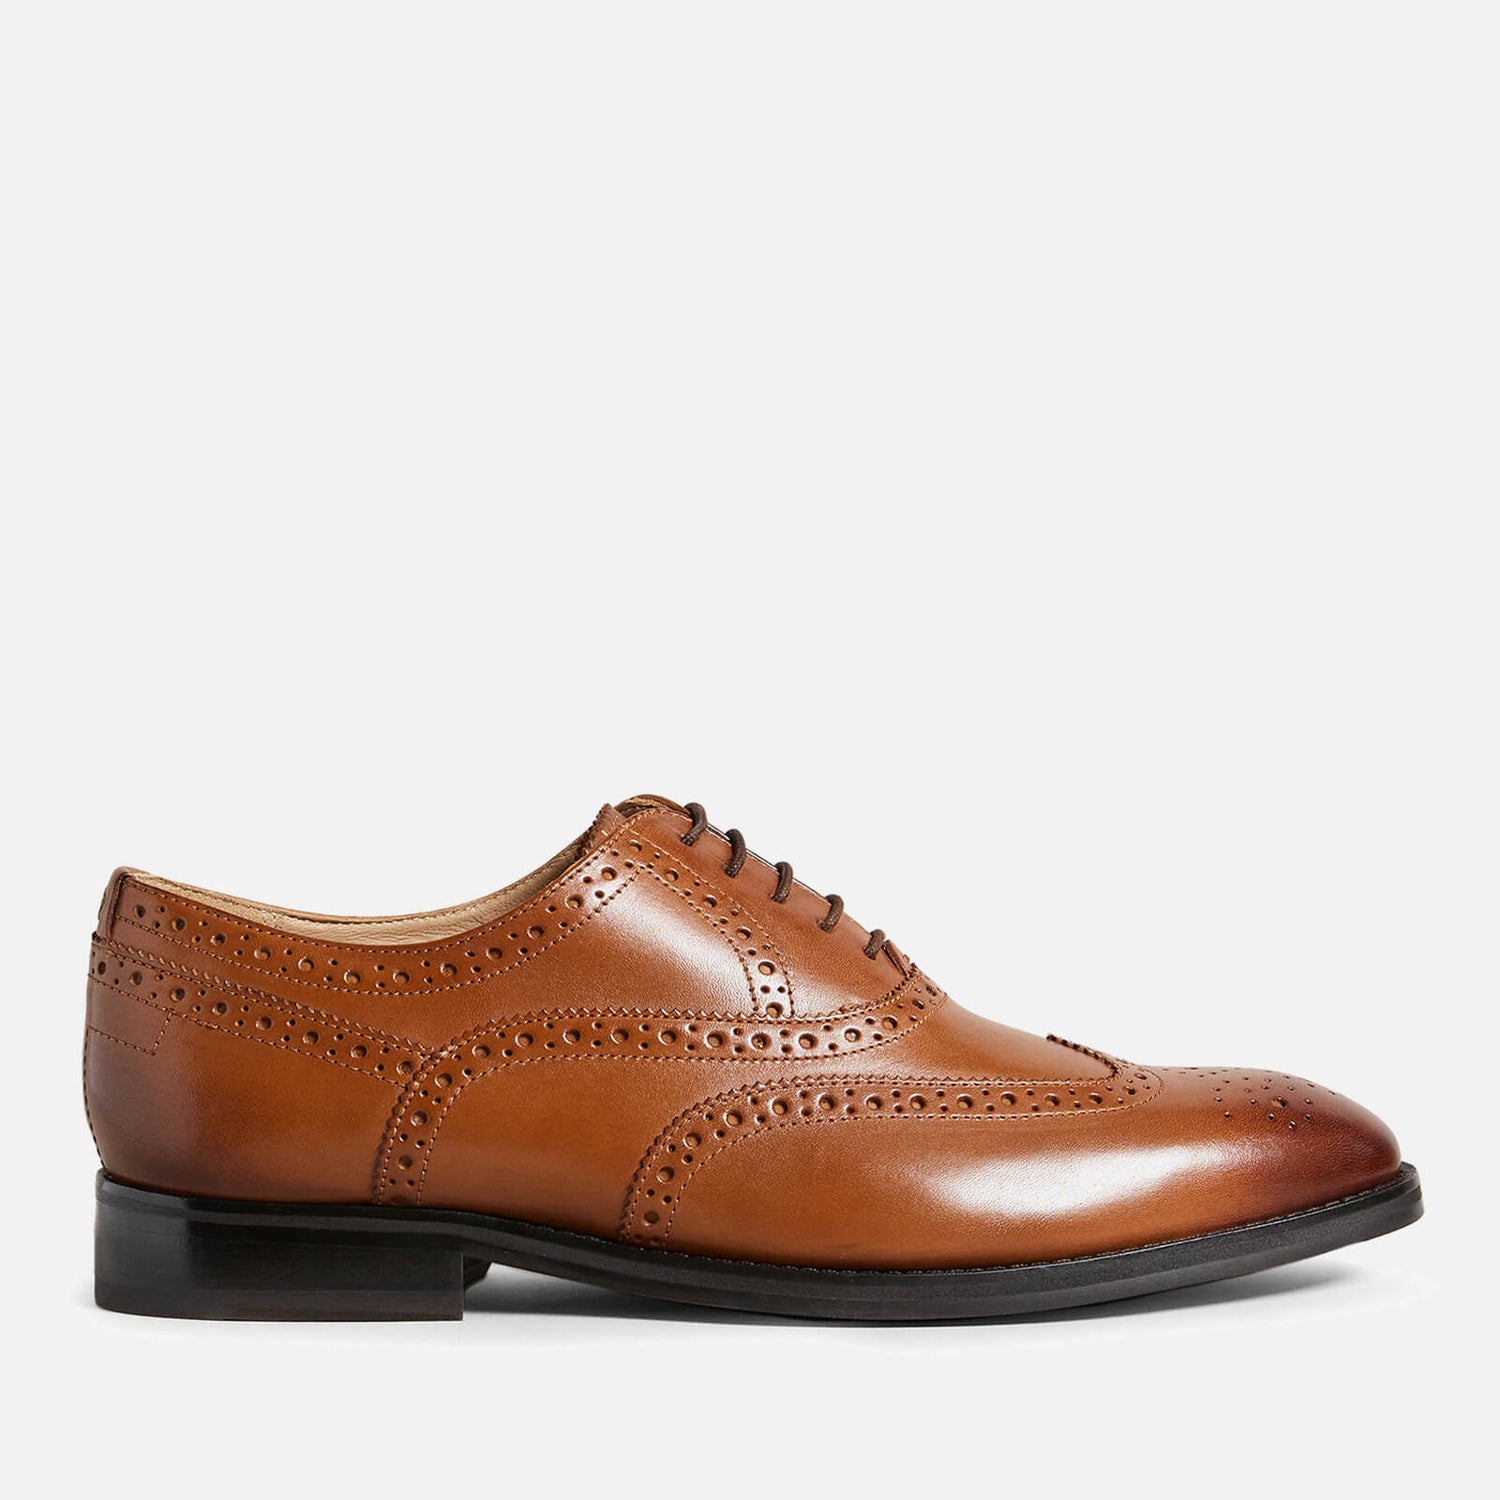 Ted Baker Amaiss Leather Brogues - UK 8